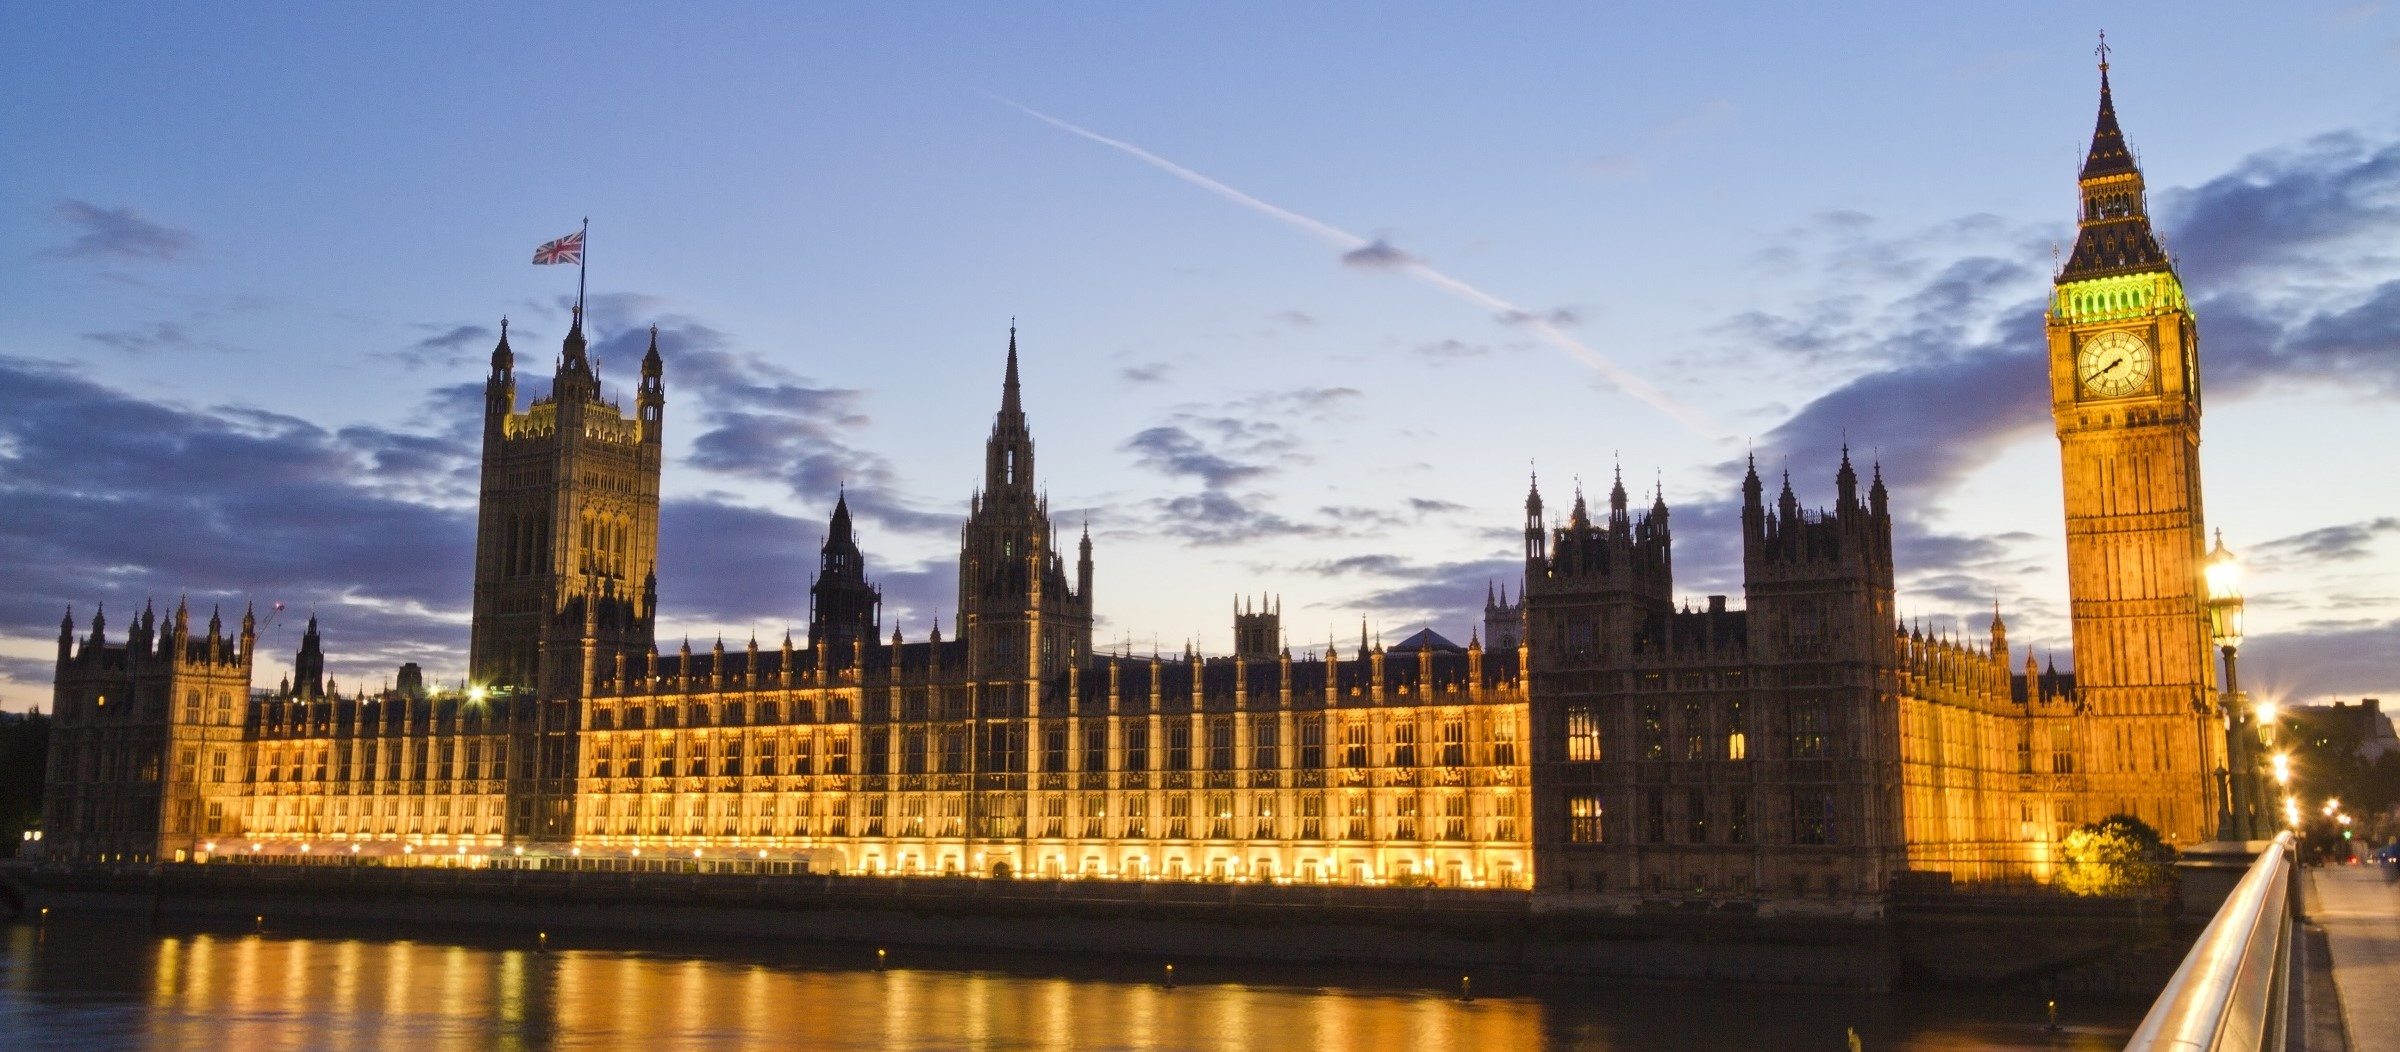 The British Parliament buildings, Palace of Westminster